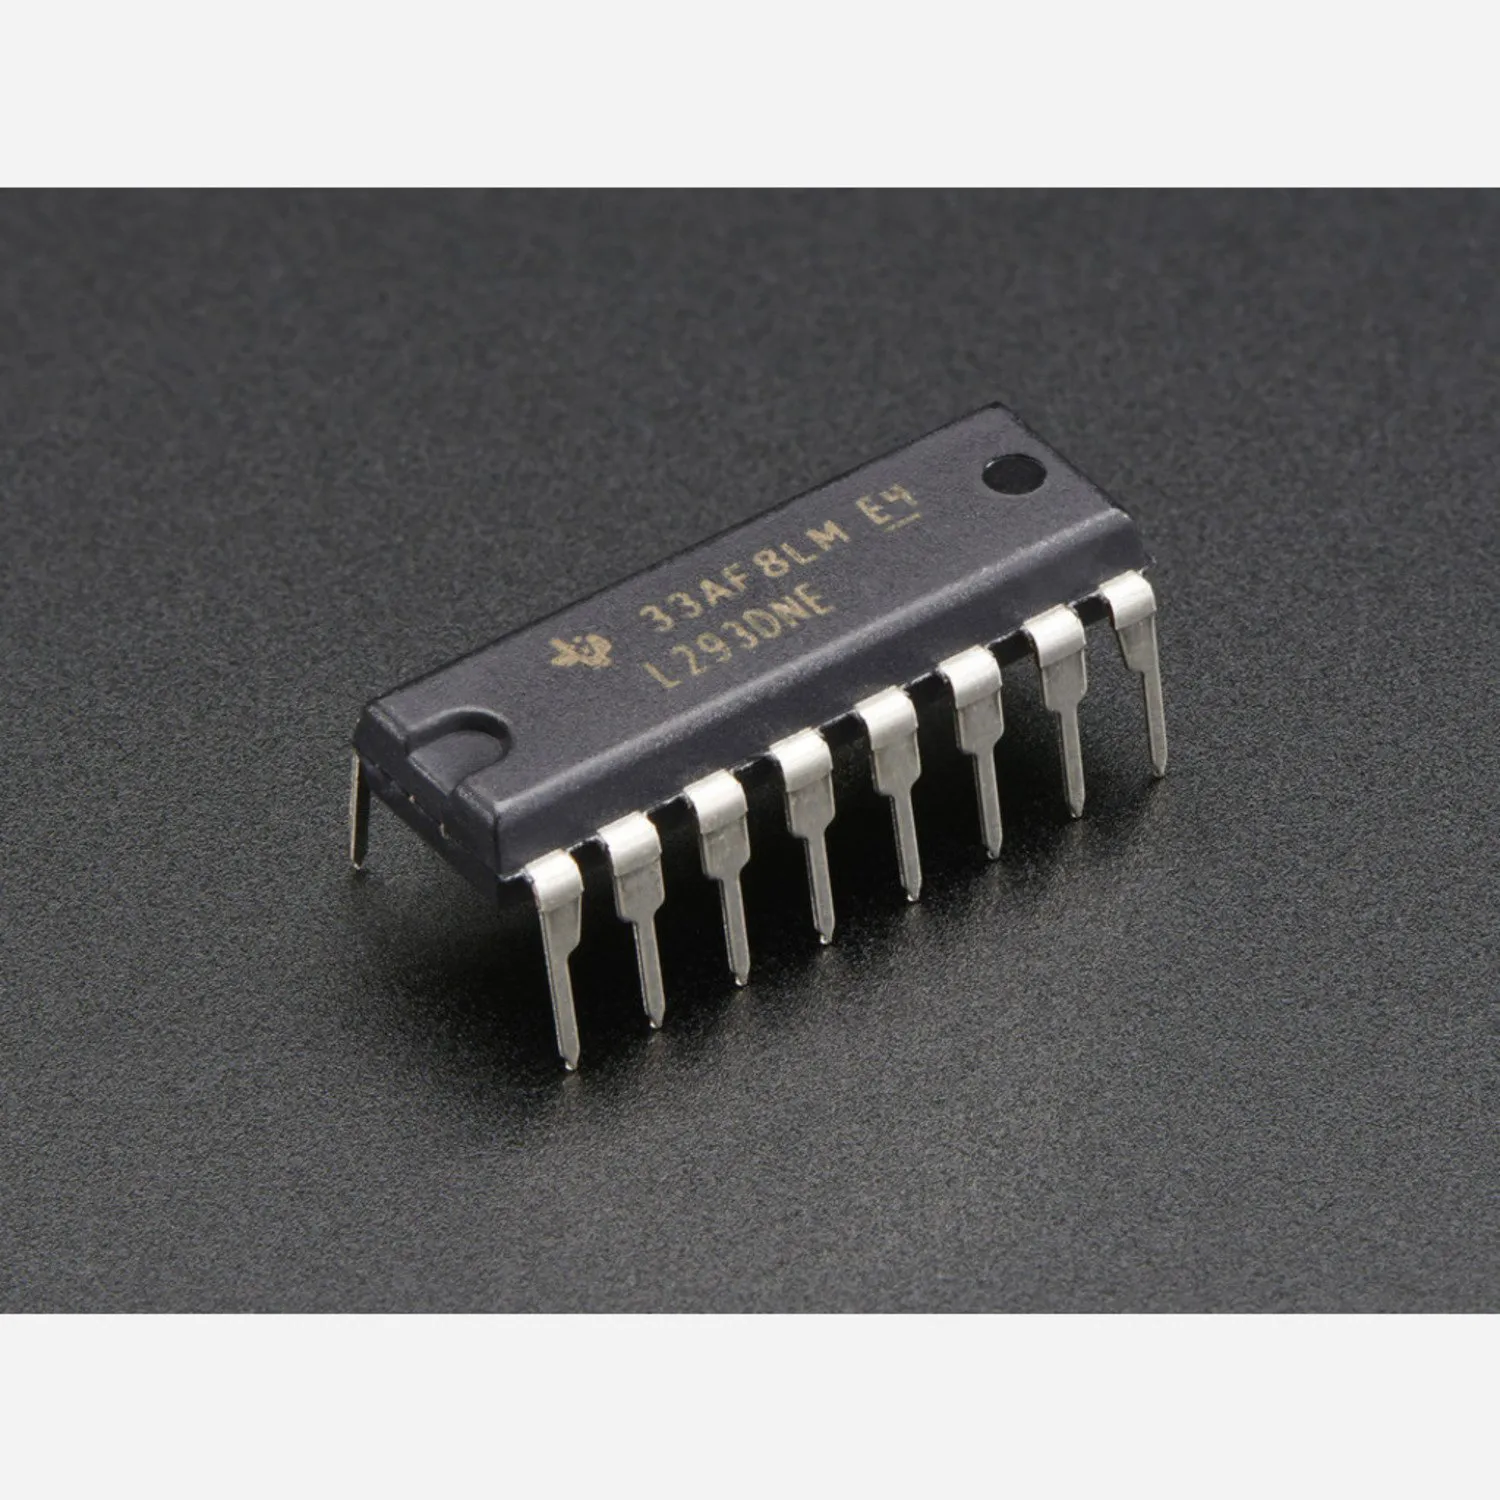 Photo of Dual H-Bridge Motor Driver for DC or Steppers - 600mA - L293D